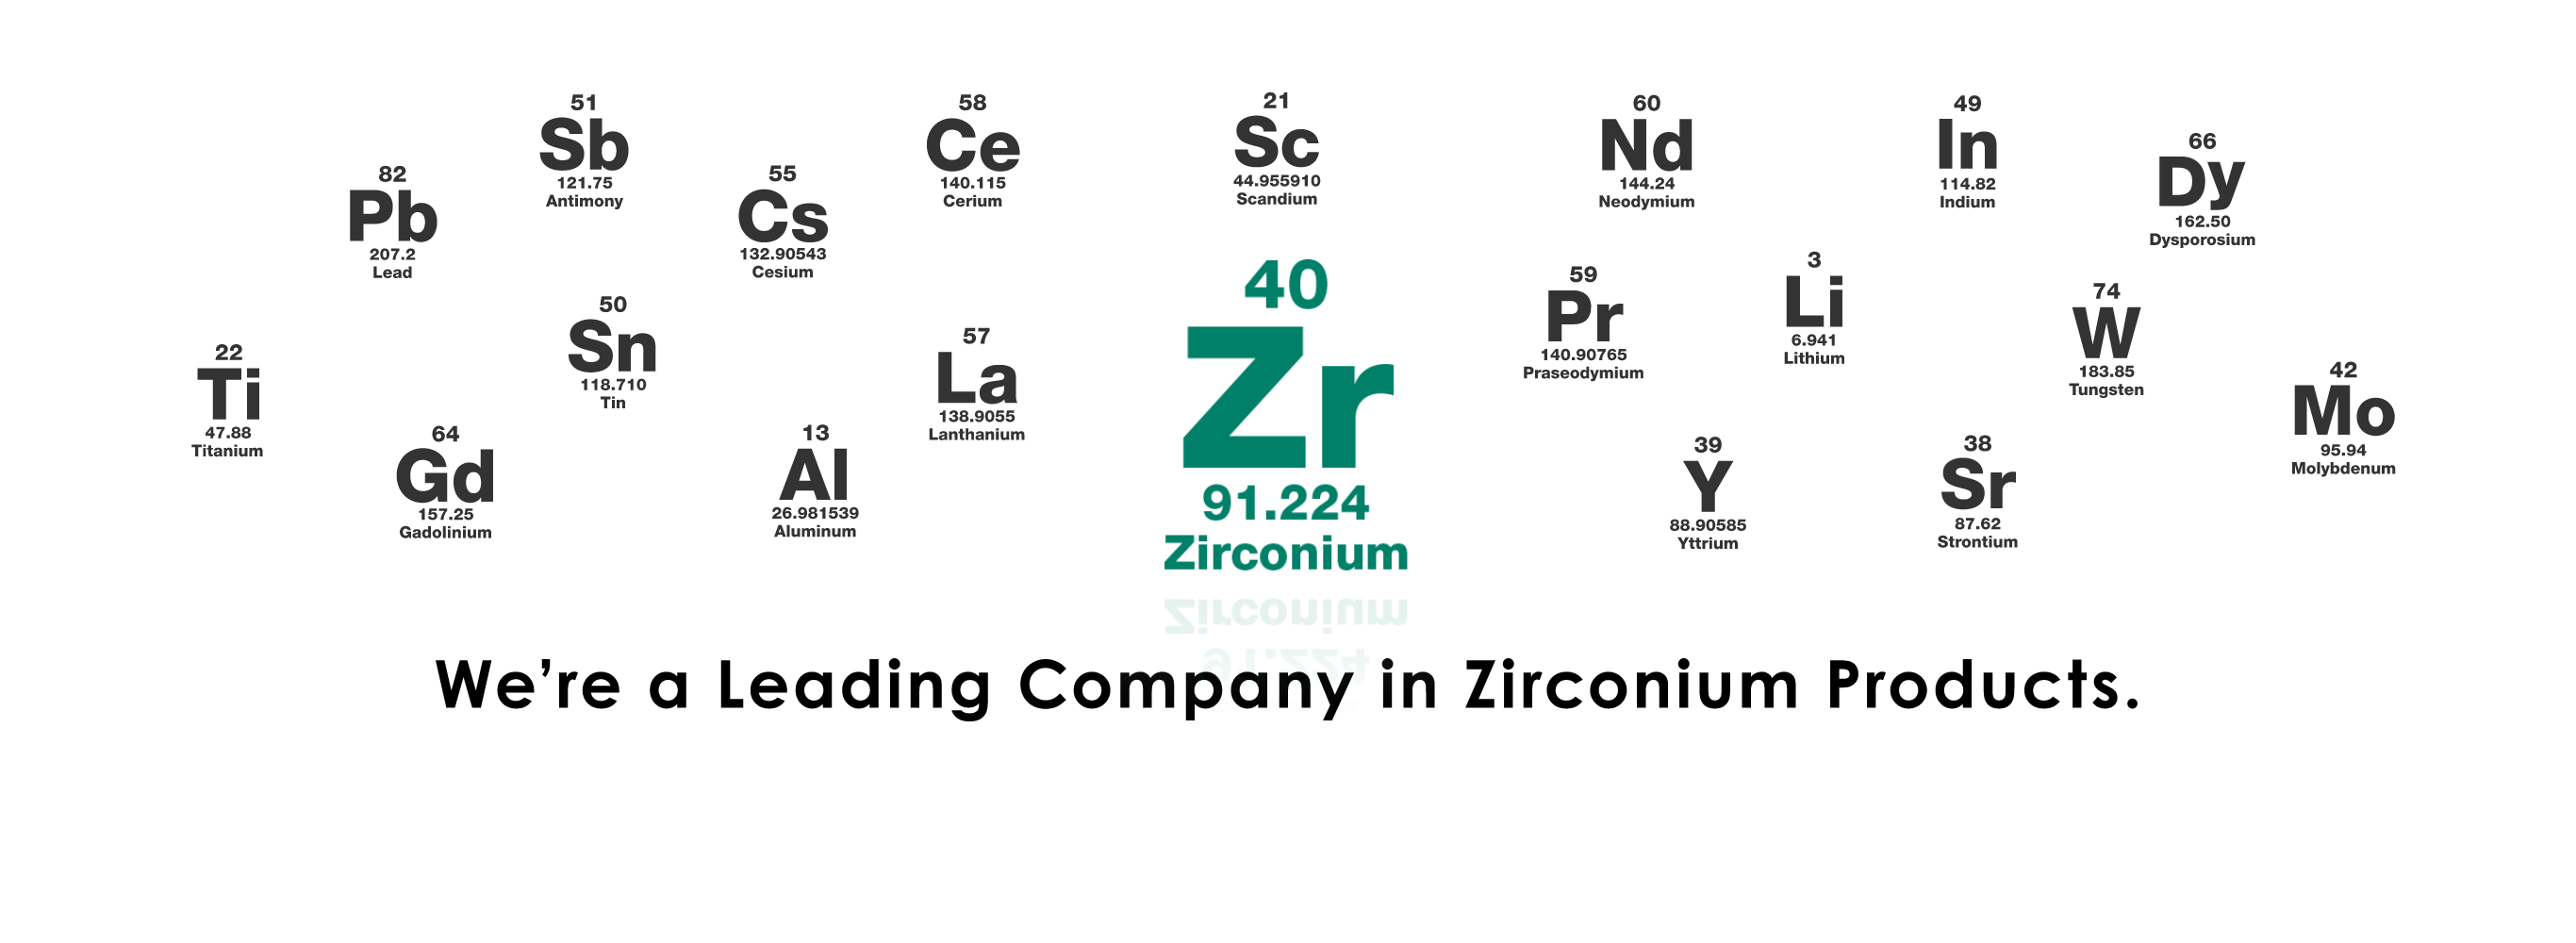 We're a Leading Company in Zirconium Products.